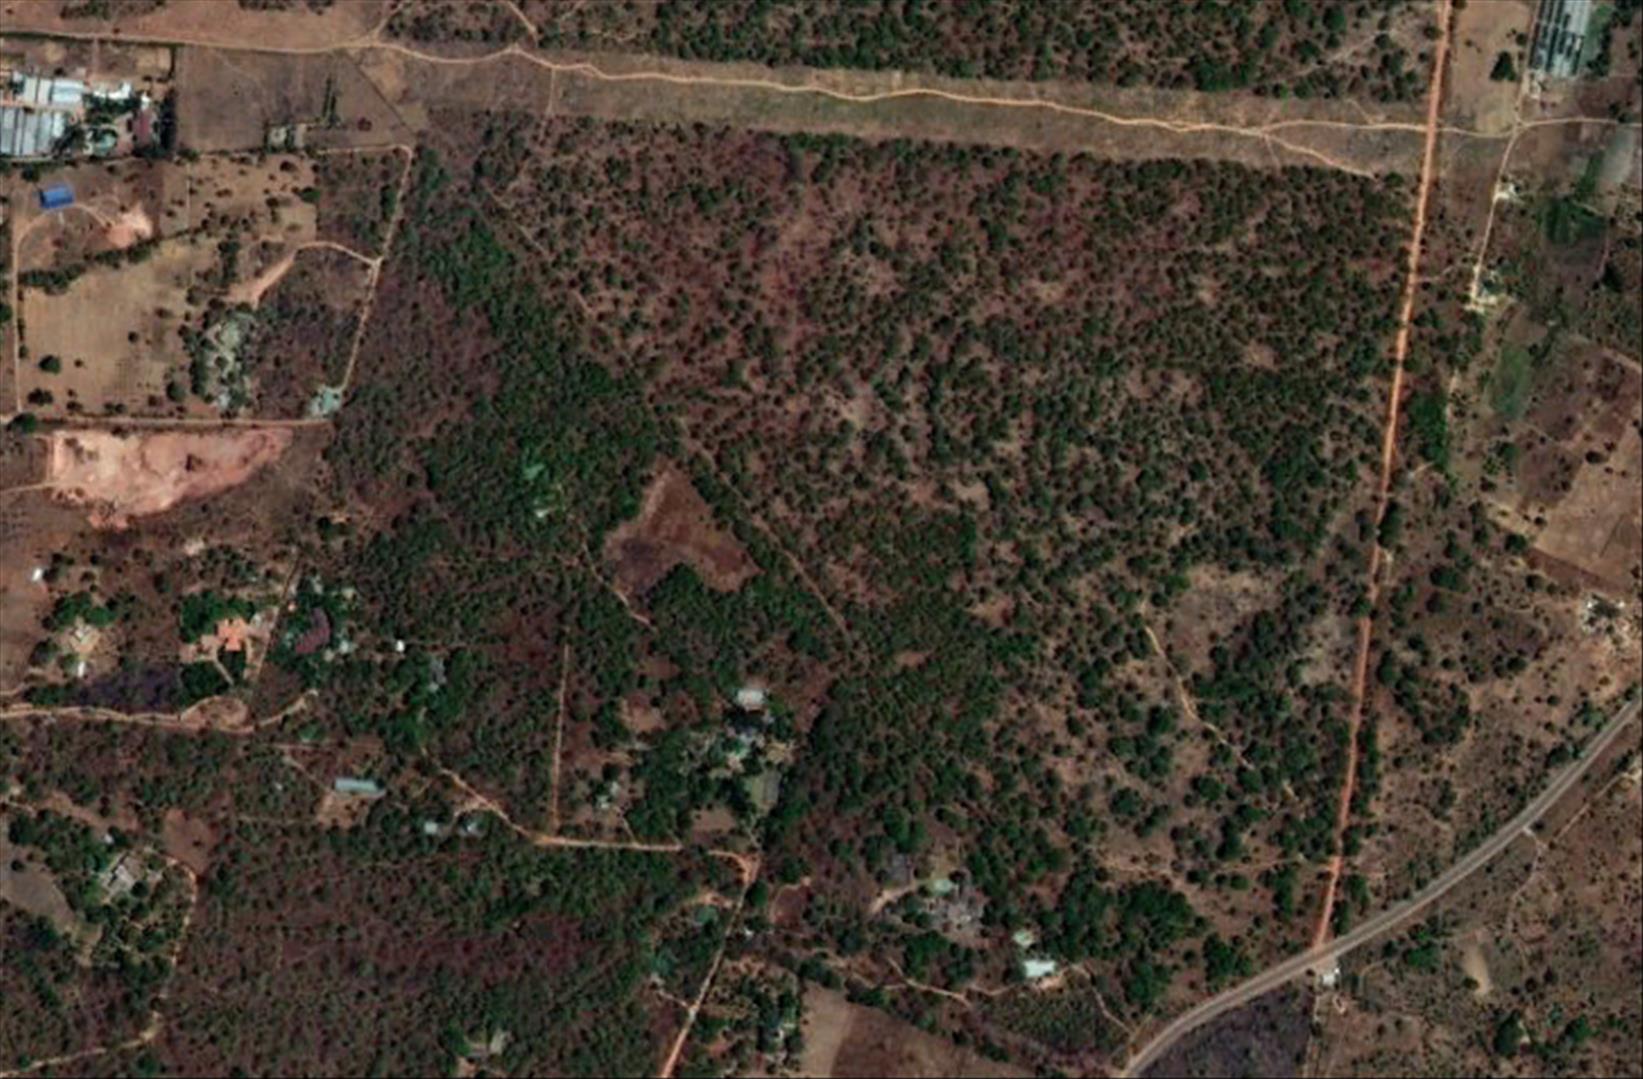 Google-Earth picture: The cleared strip at the top of the image is the ZESCO powerline clearing